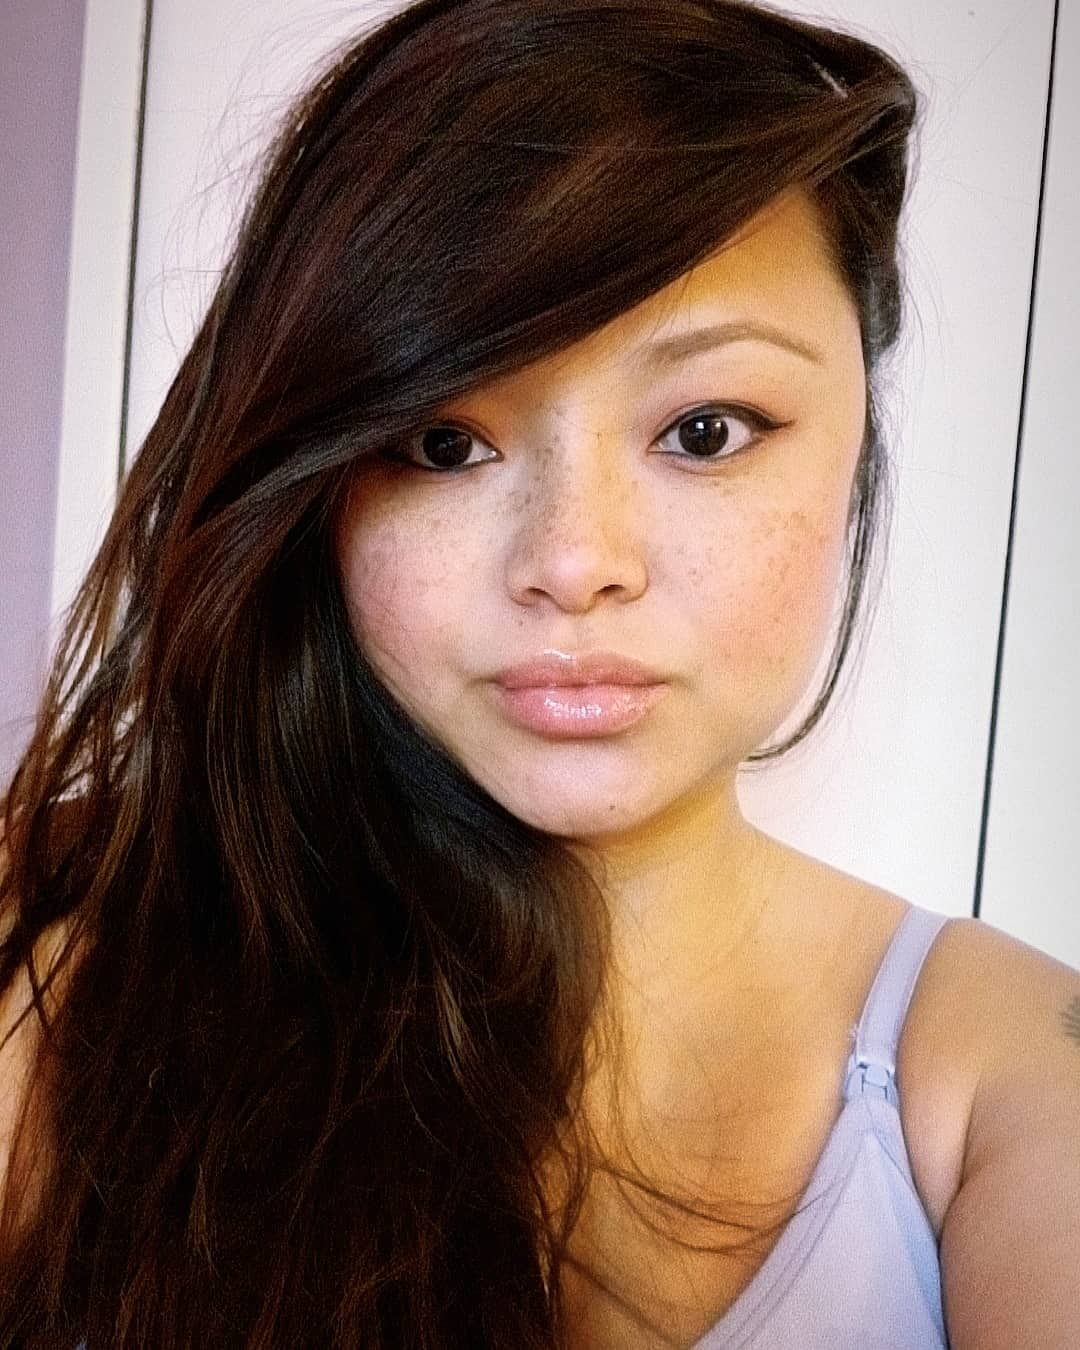 Tila Tequila: 2021 Update, What Happened, Who Is She, And Dating ...